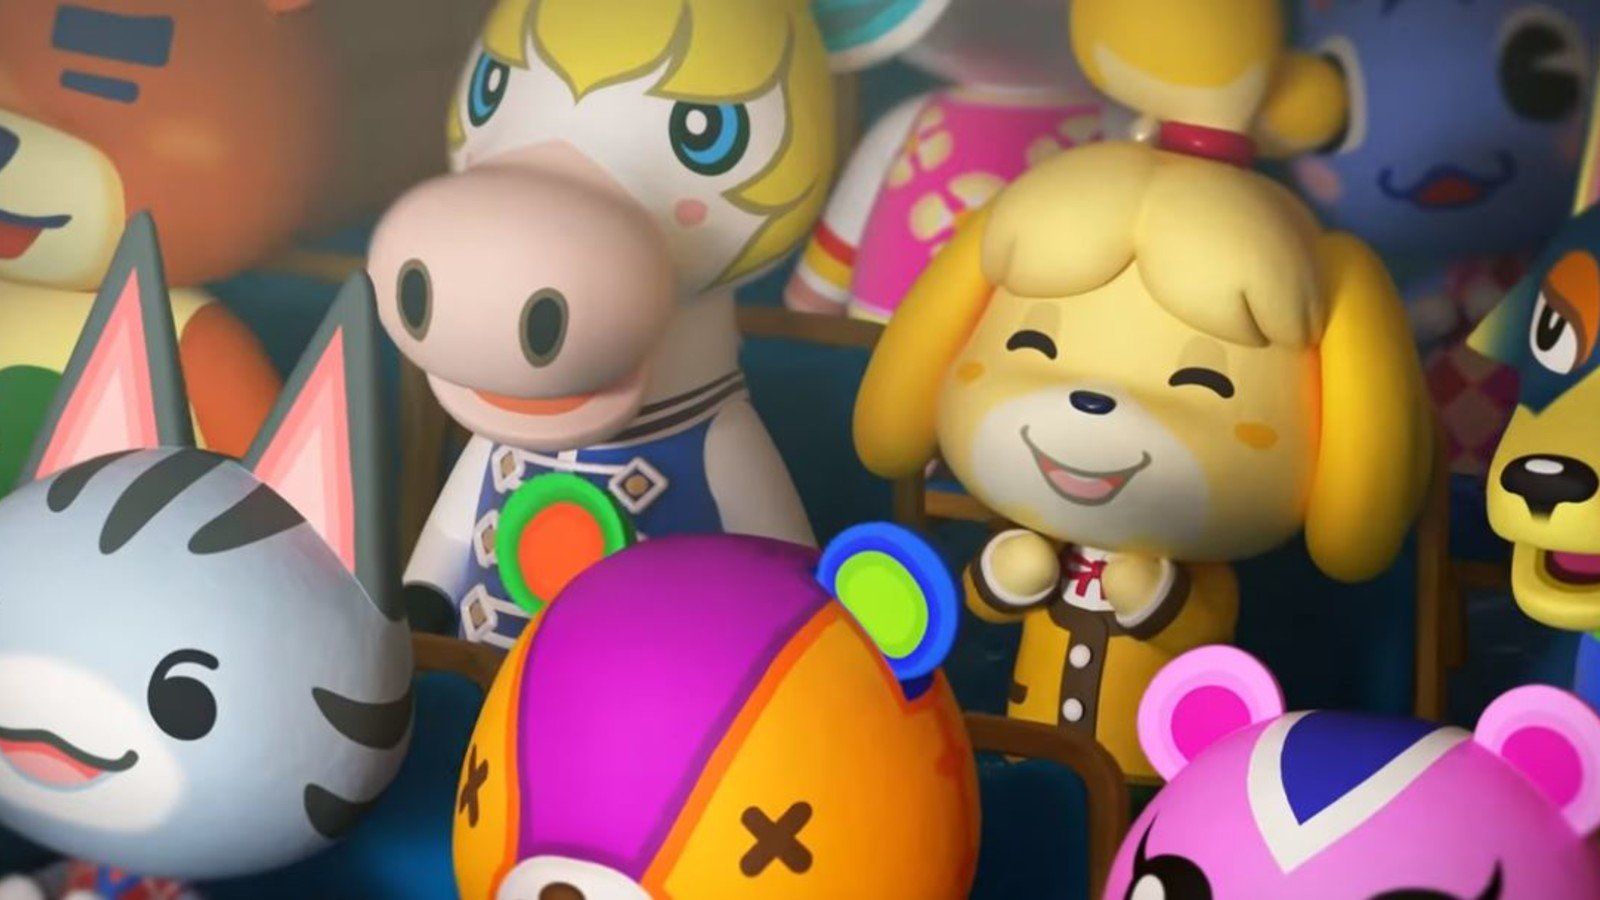 Will Isabelle be in Animal Crossing: New Horizons?